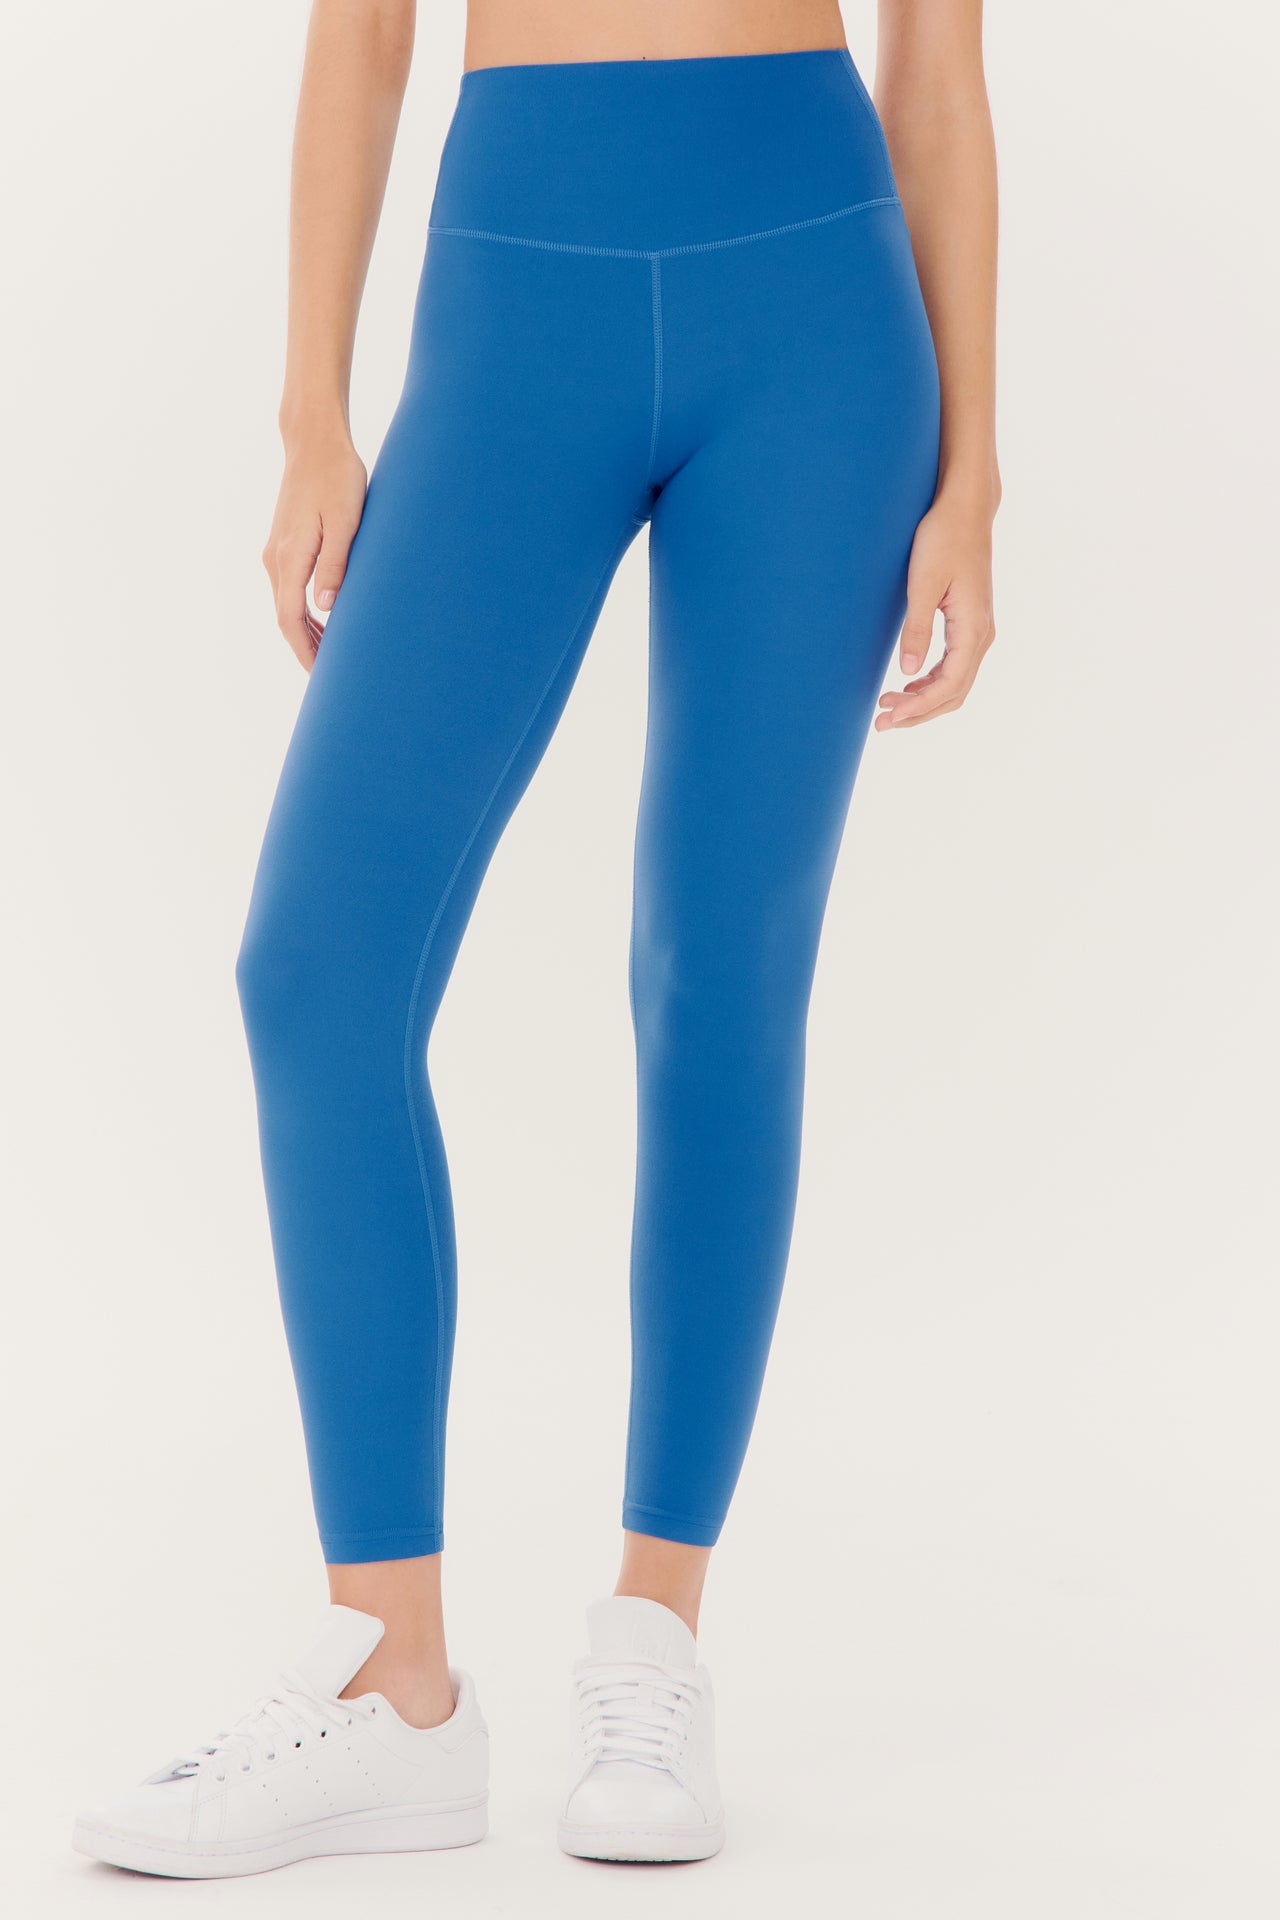 A person wearing Splits59 Airweight High Waist Legging in Stone Blue and white sneakers.